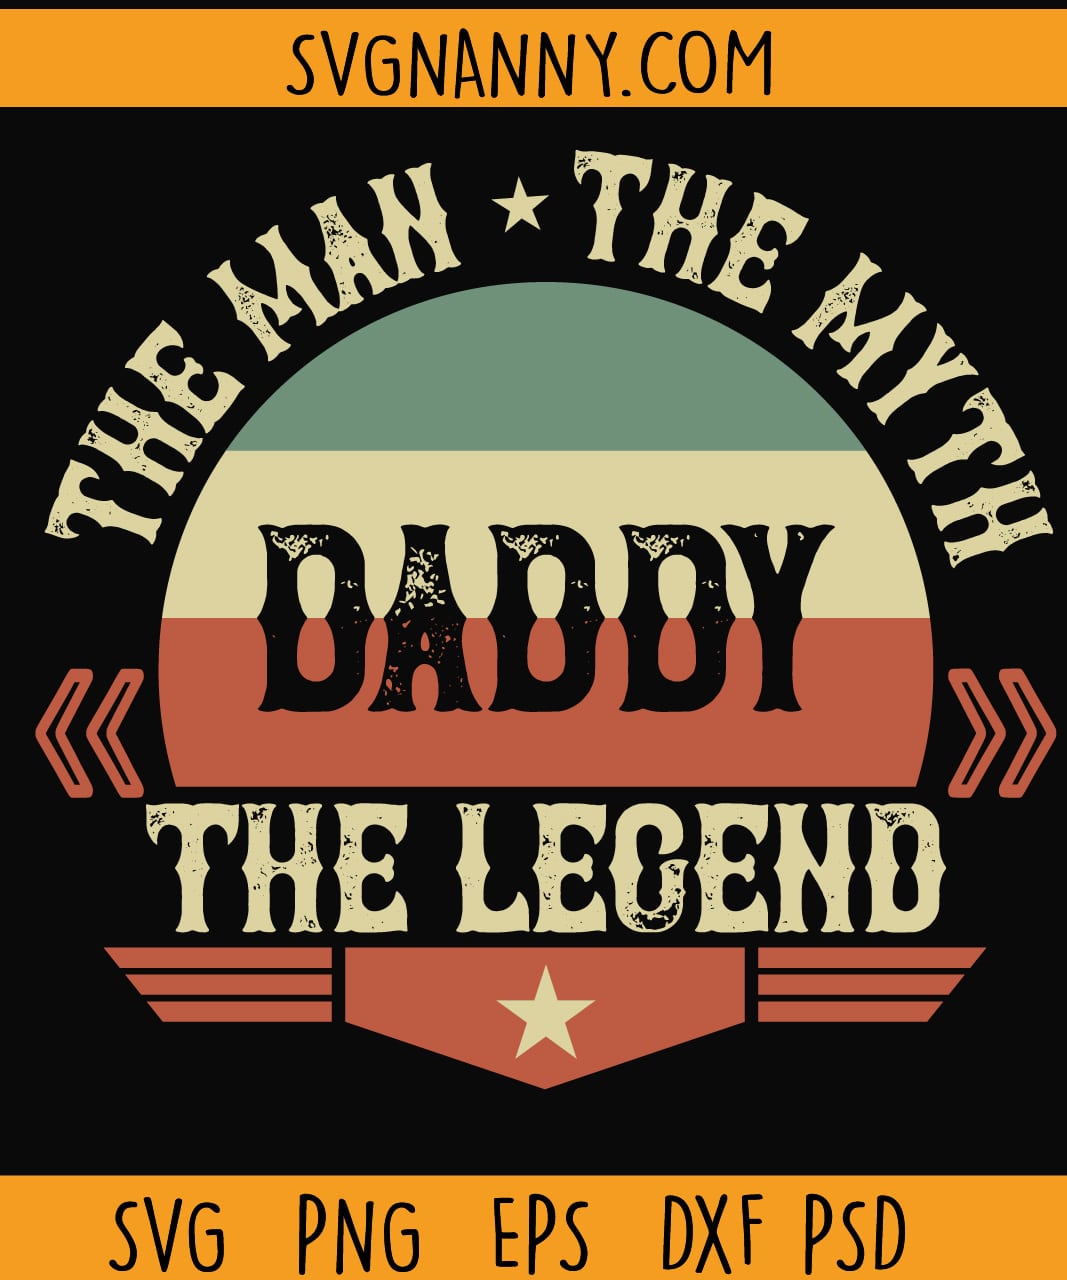 bIgFoOt sVg fAtHeRs dAy sVg dAd yOu aRe tHe lEgEnD SvG lEgEnD DaD SvG lEgEnD SvG DaD SvG